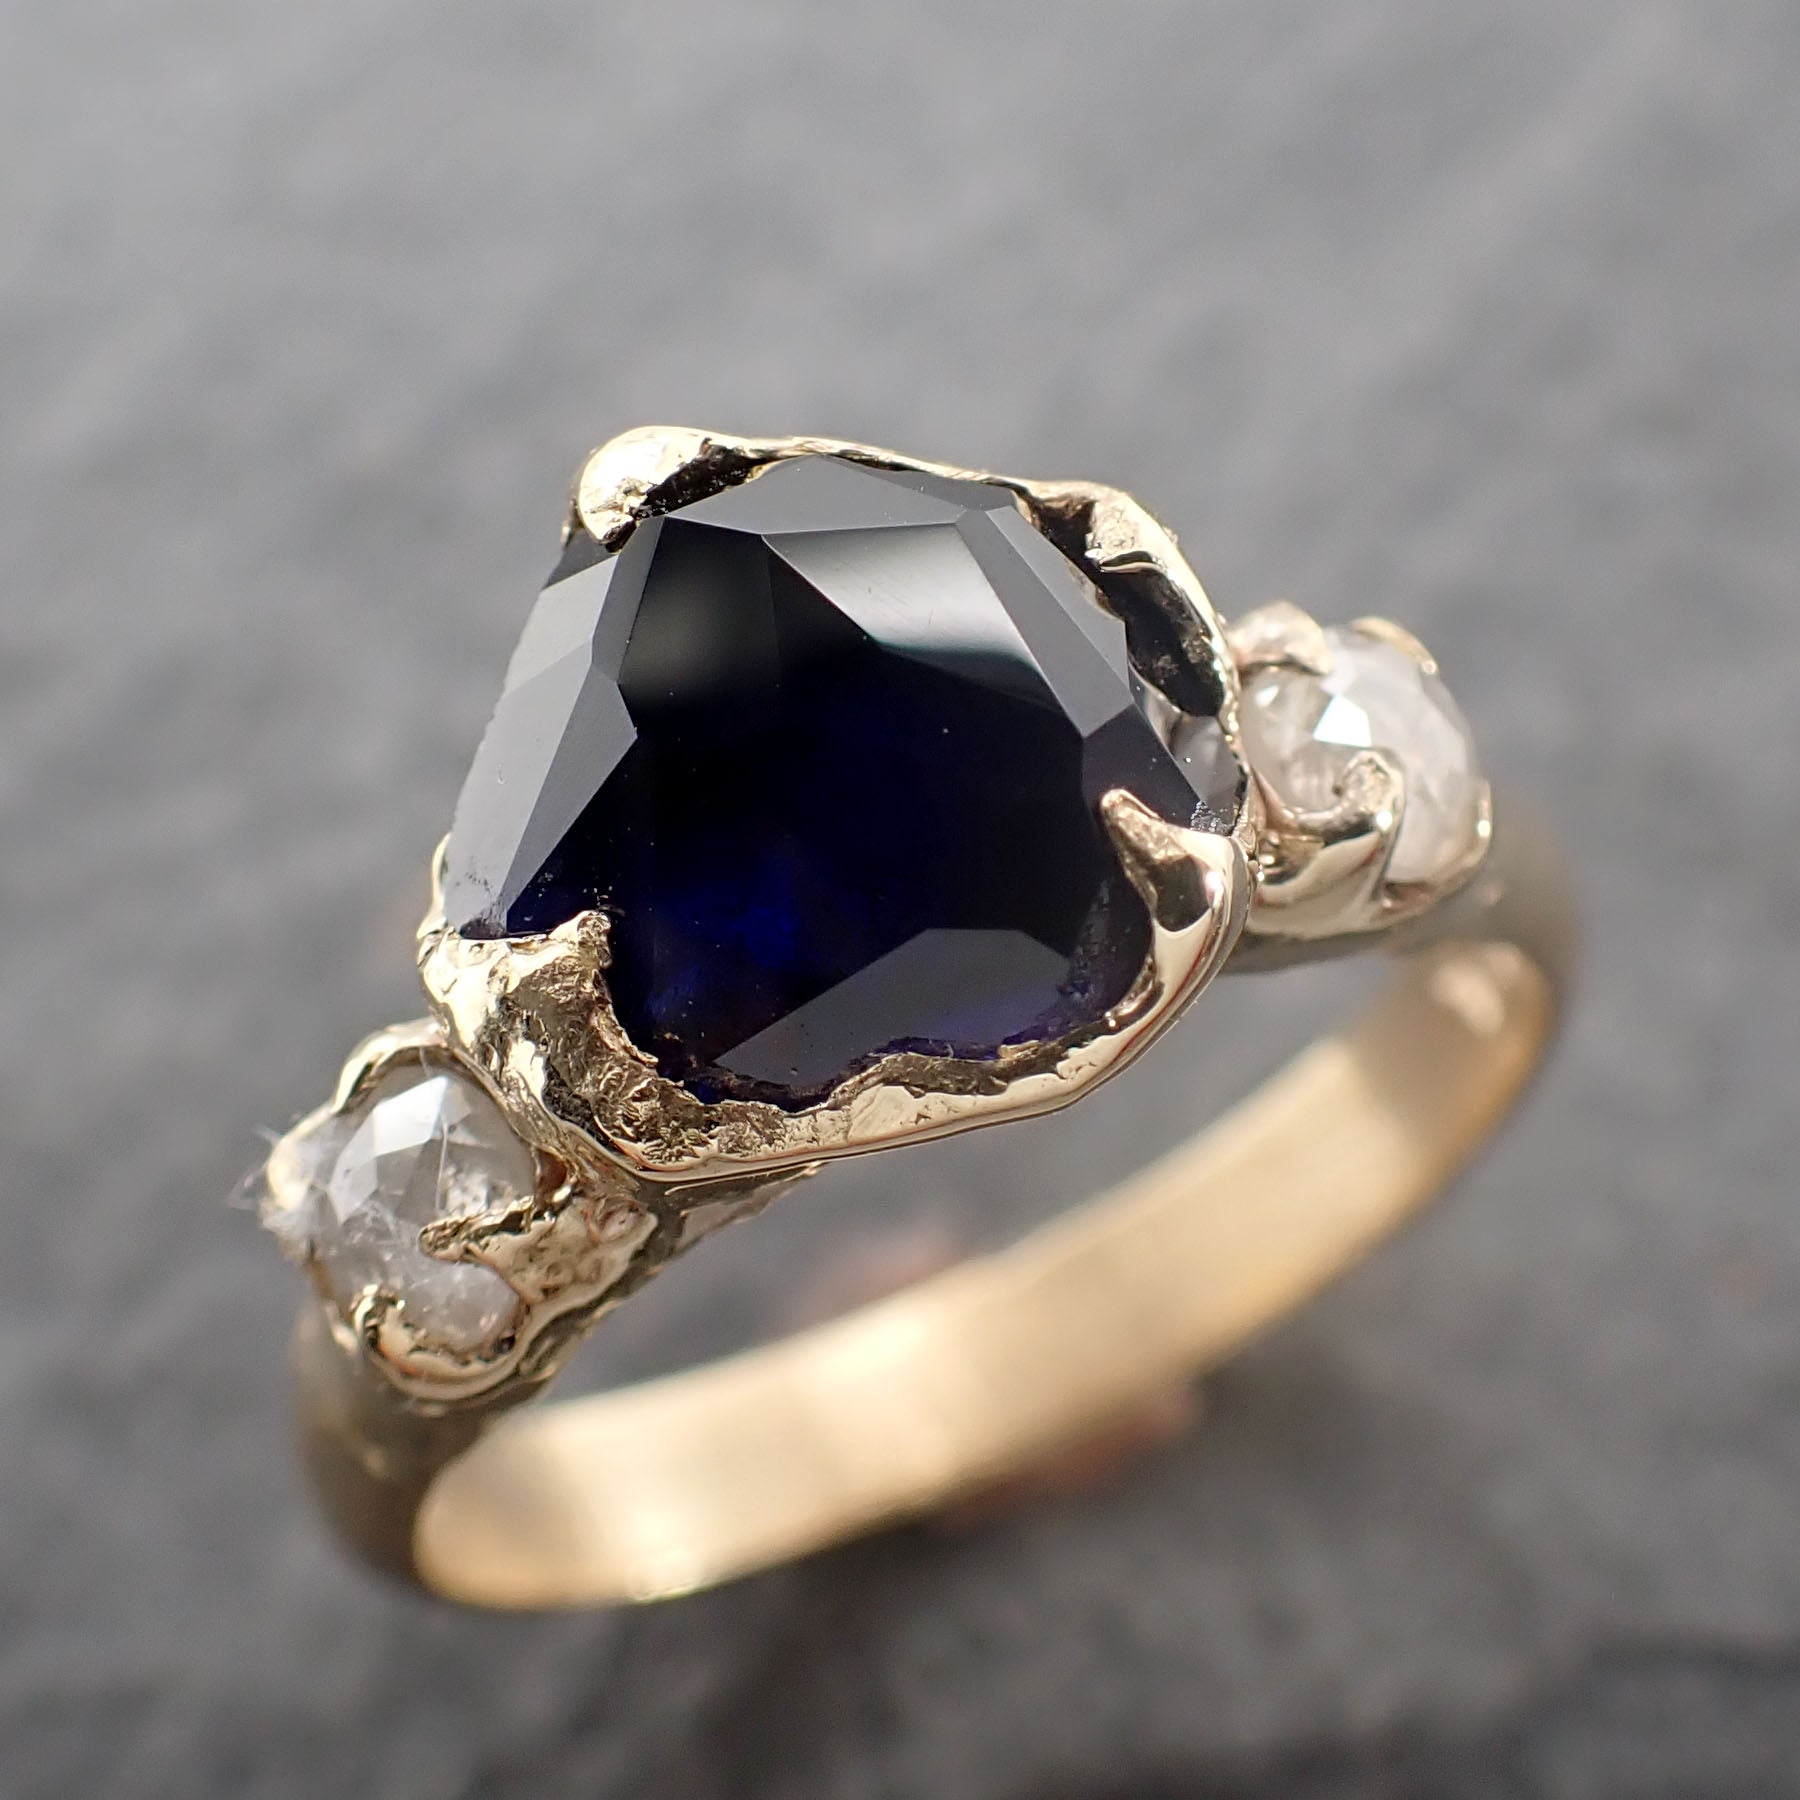 Partially Faceted blue Sapphire side diamonds Multi stone 14k Gold Engagement Ring Wedding Ring Custom Gemstone Ring 2519